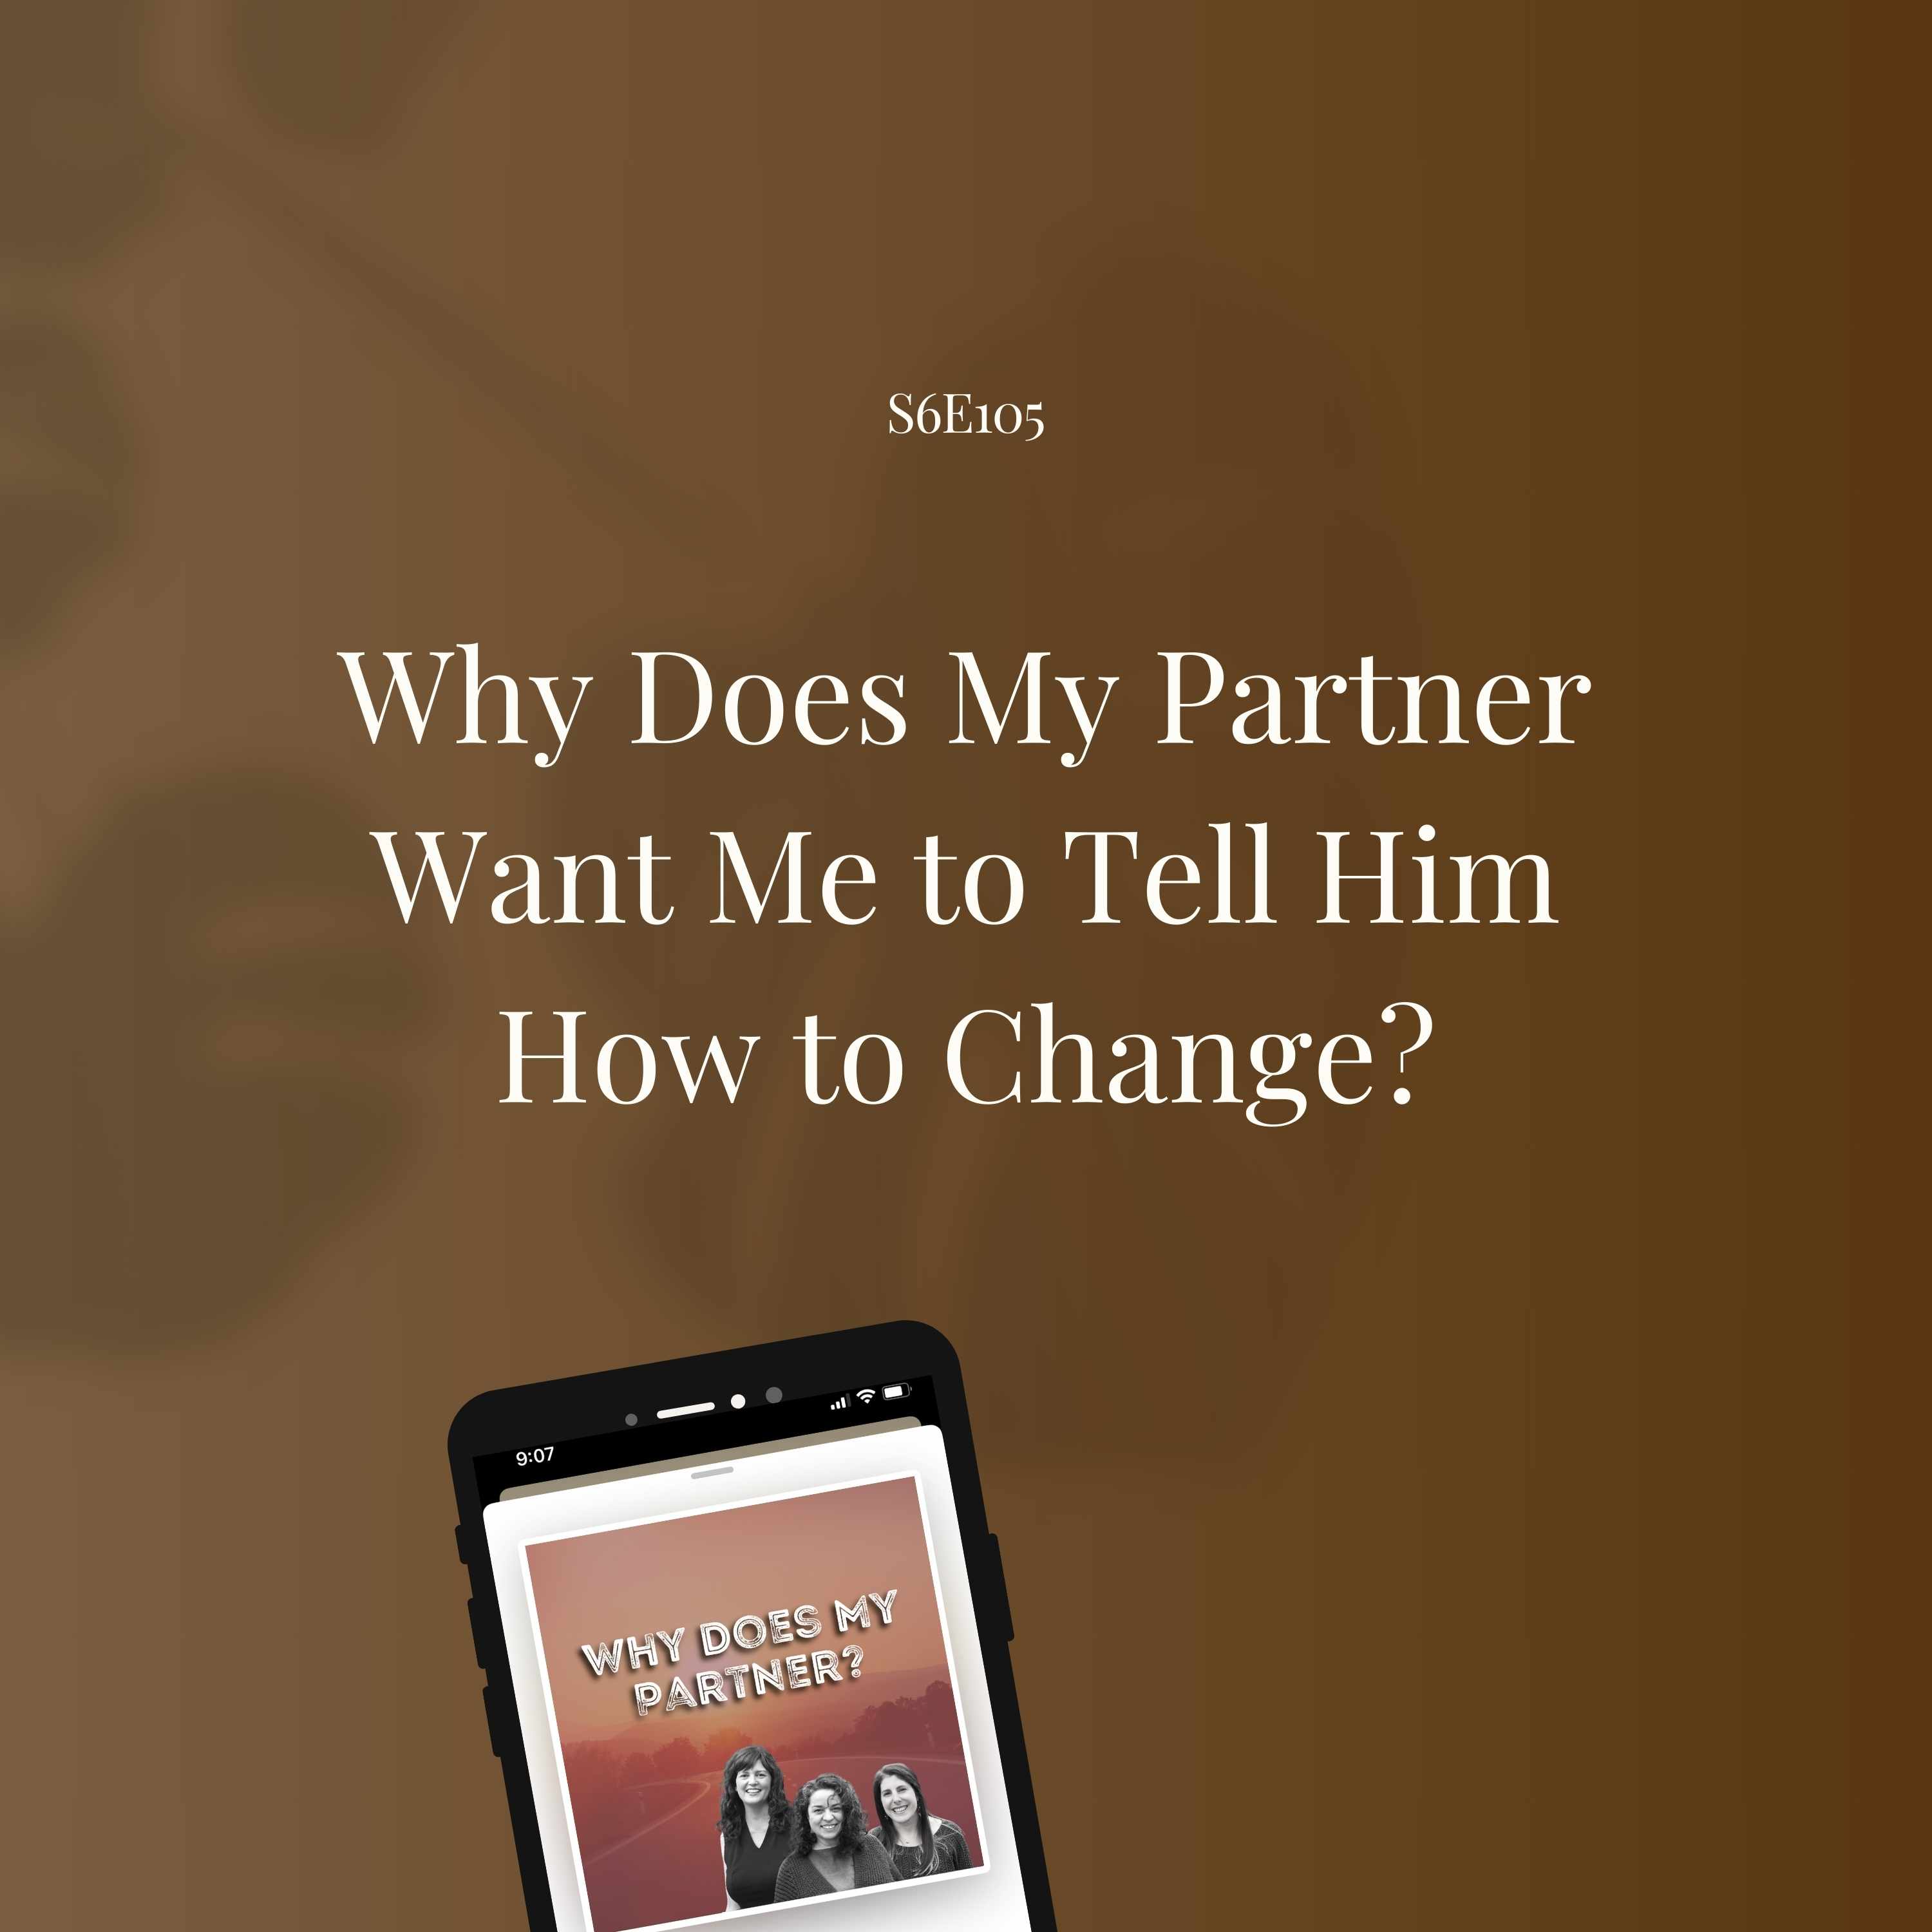 Why Does My Partner Want Me to Tell Him How to Change?